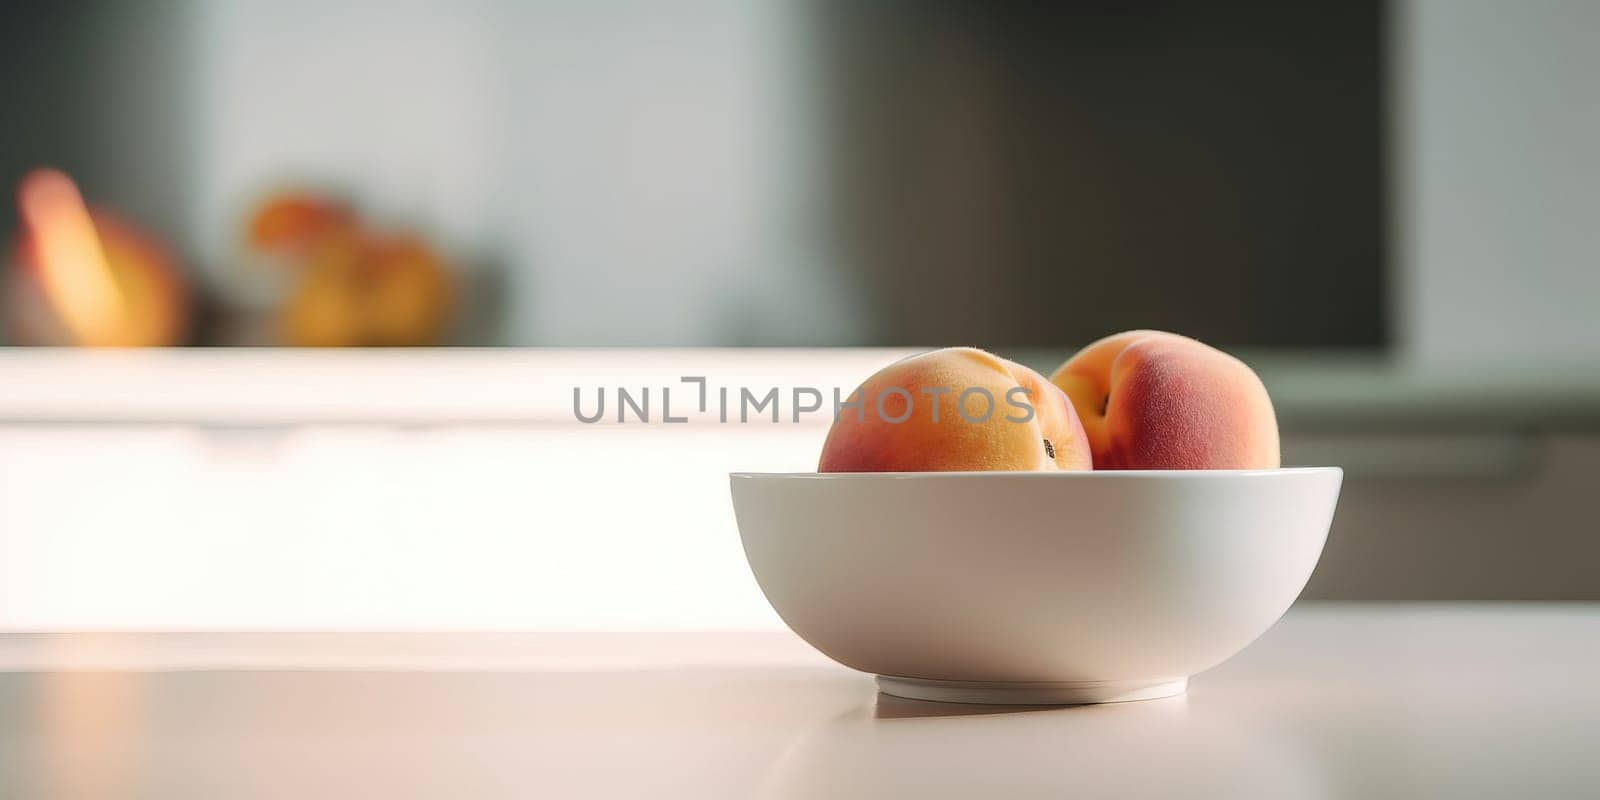 Peaches in a bowl on the table against the background of the kitchen